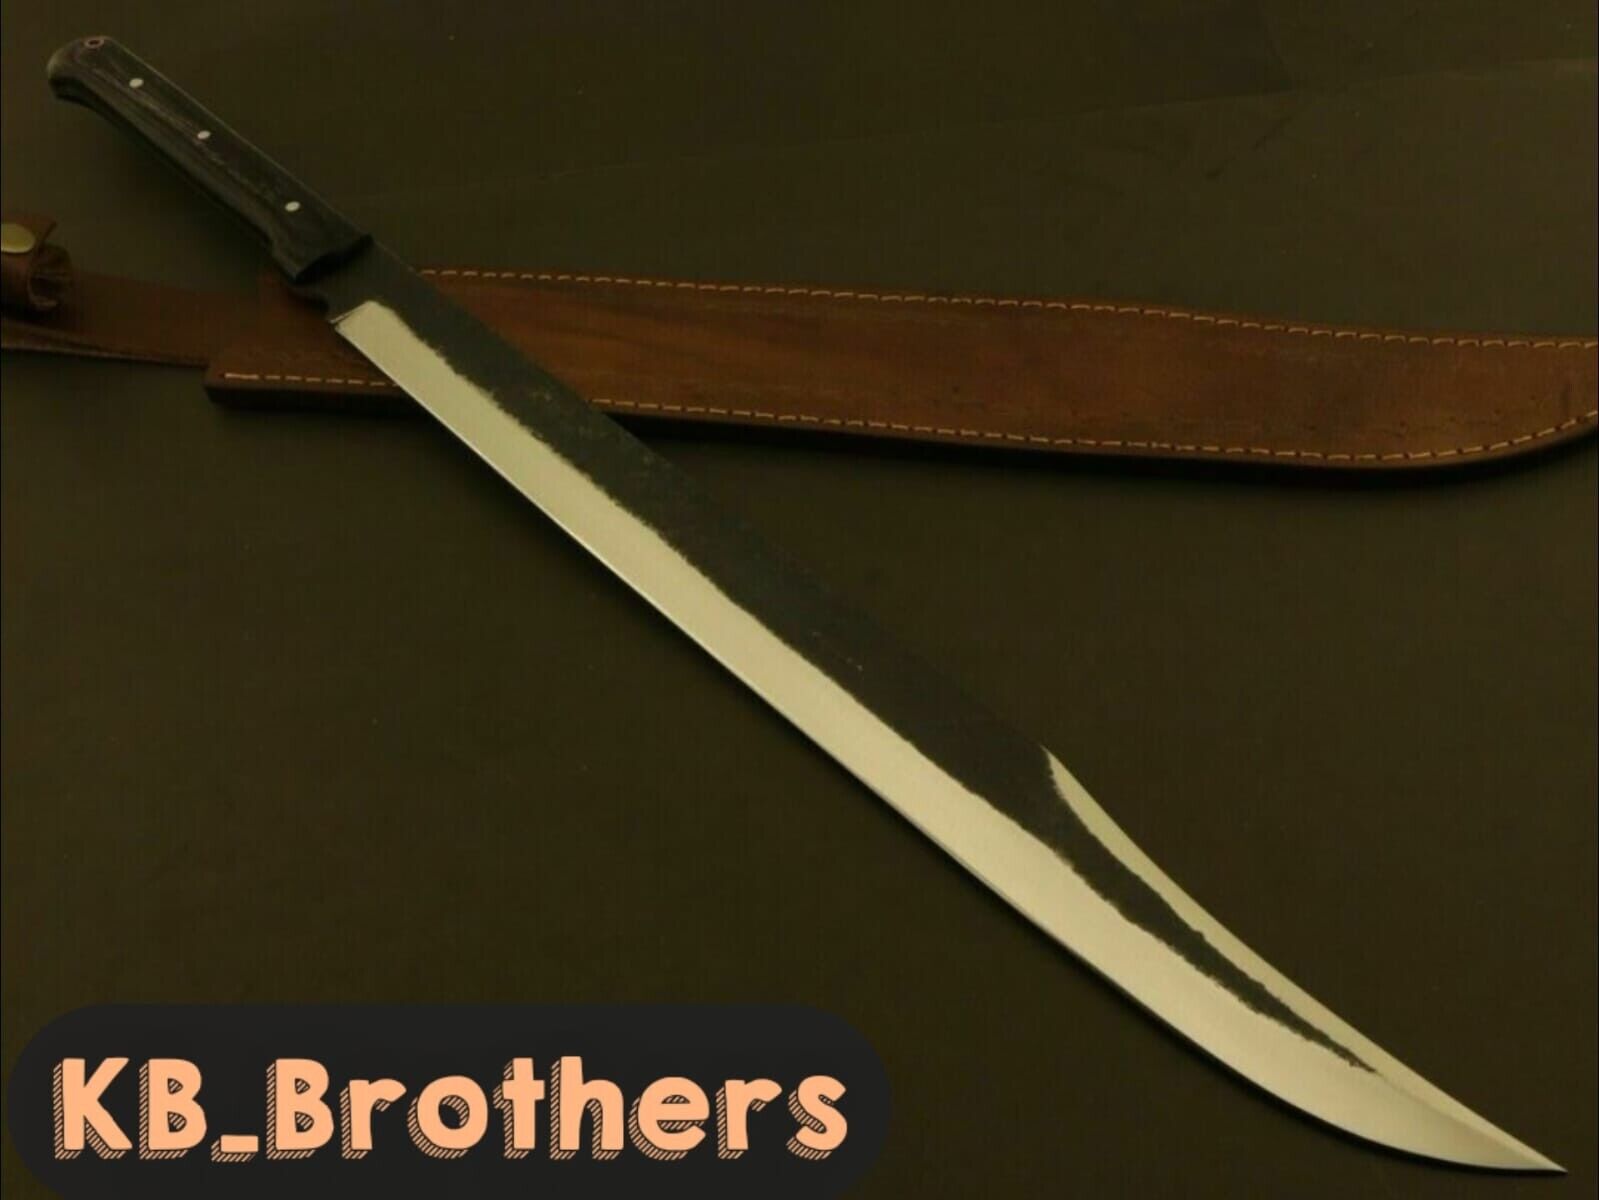 Custom Handmade Carbon Steel Beautiful Sword-Hunting-Gift for him-24-inches.